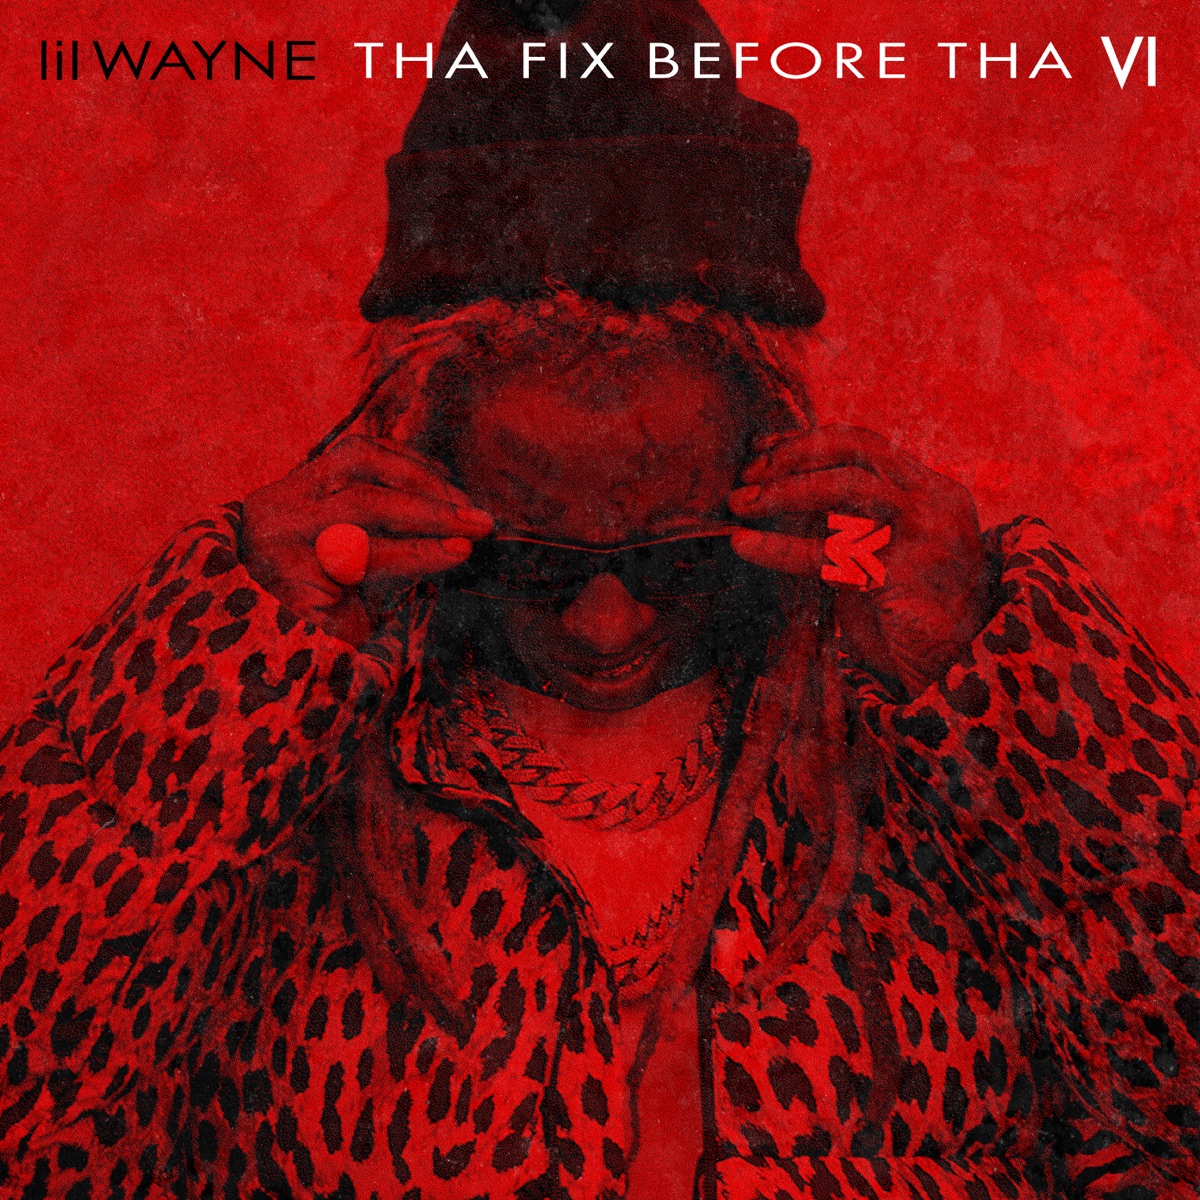 MP3: Lil Wayne Ft. Cool & Dre – To The Bank